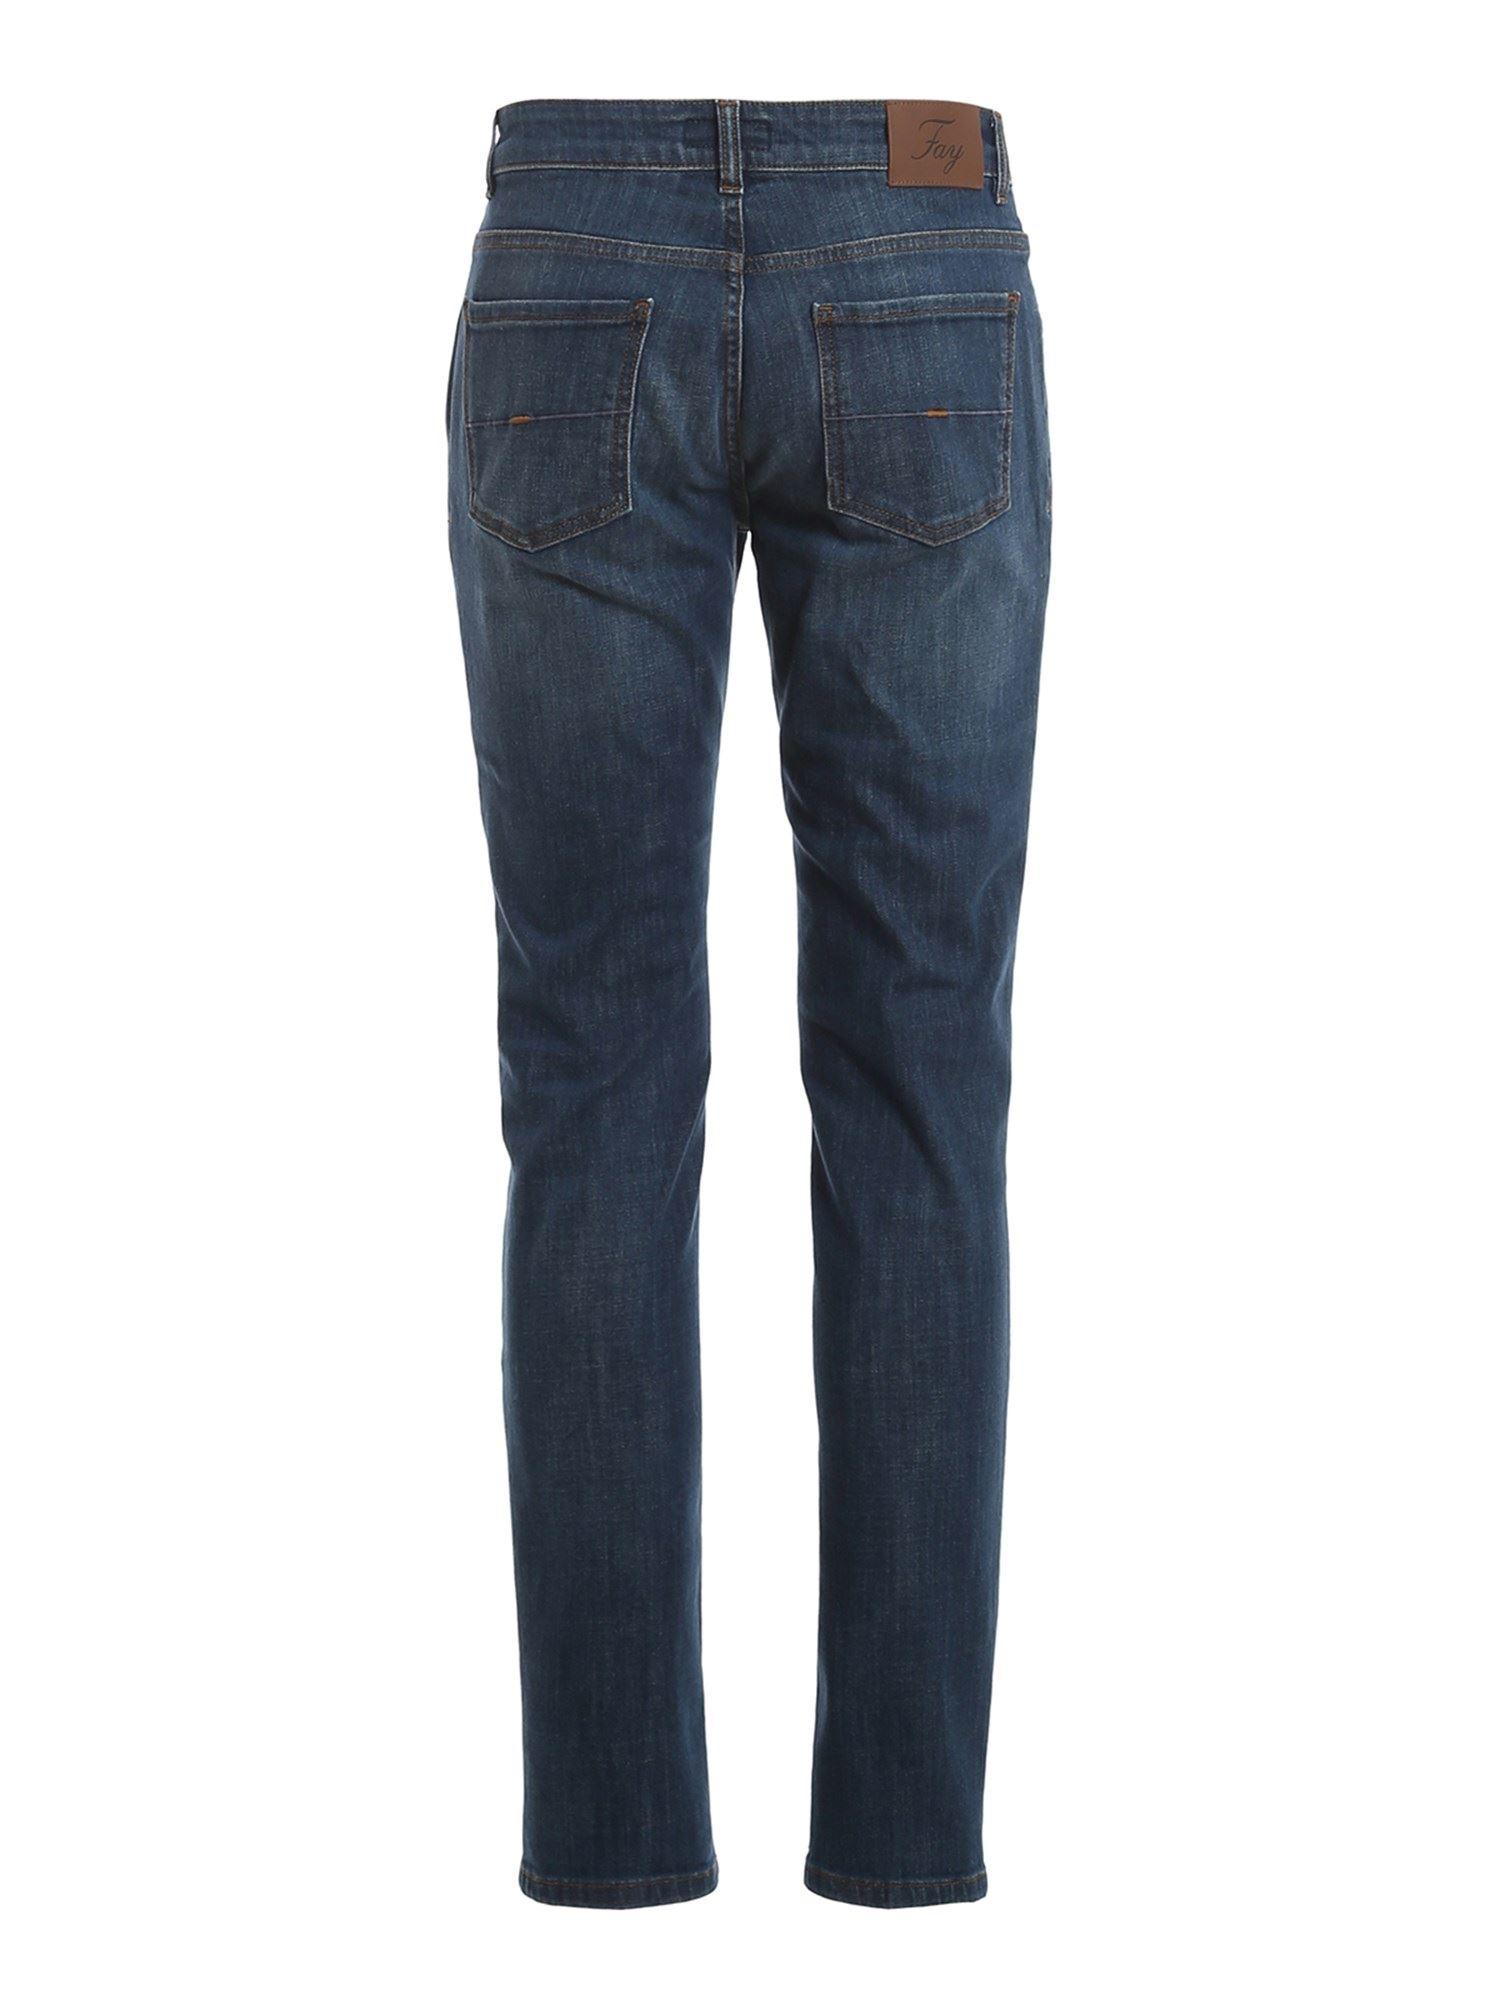 Fay Faded Stretch Denim Jeans in Blue for Men - Lyst